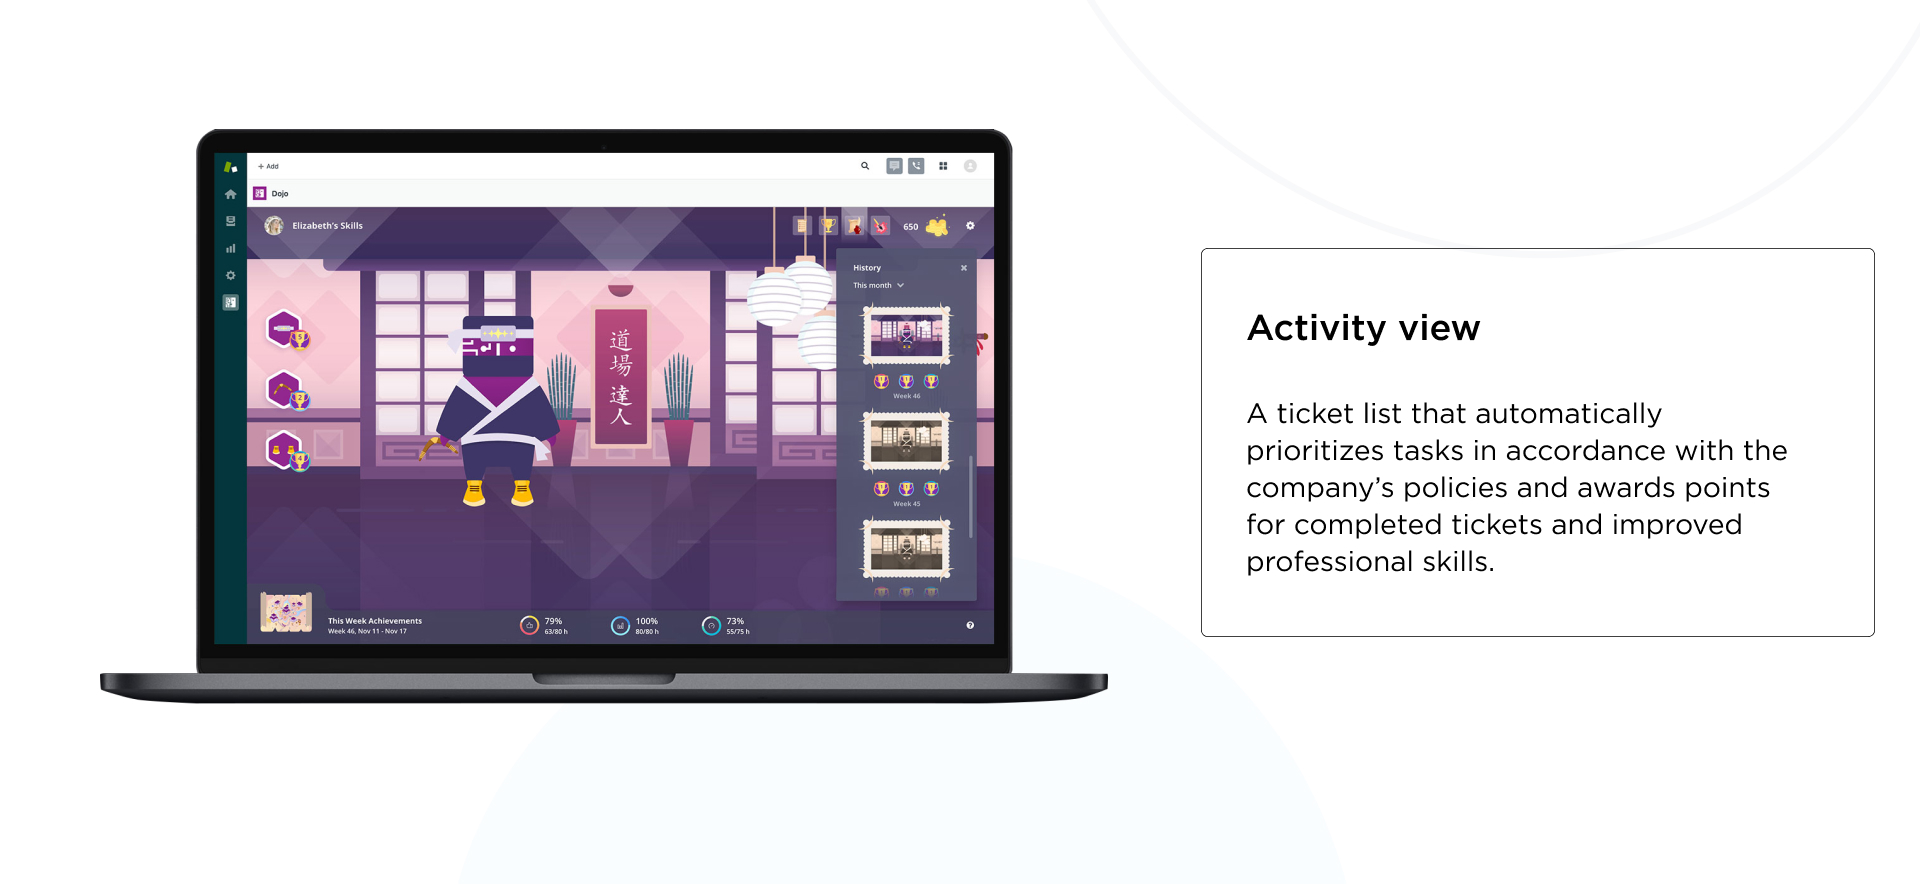 activity view page design